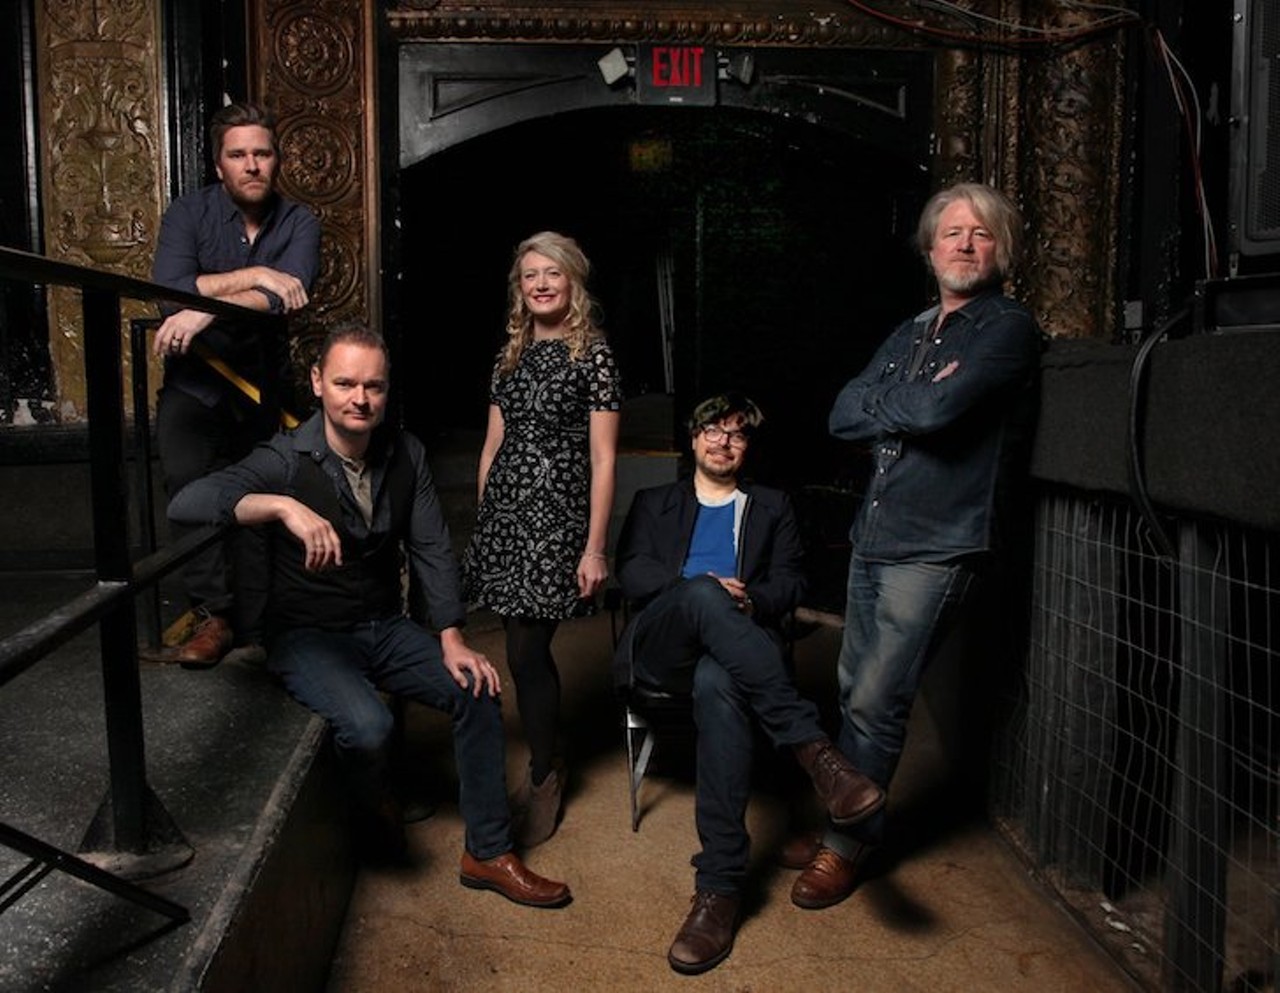 Wednesday, Jan. 22Gaelic Storm at the Plaza Live